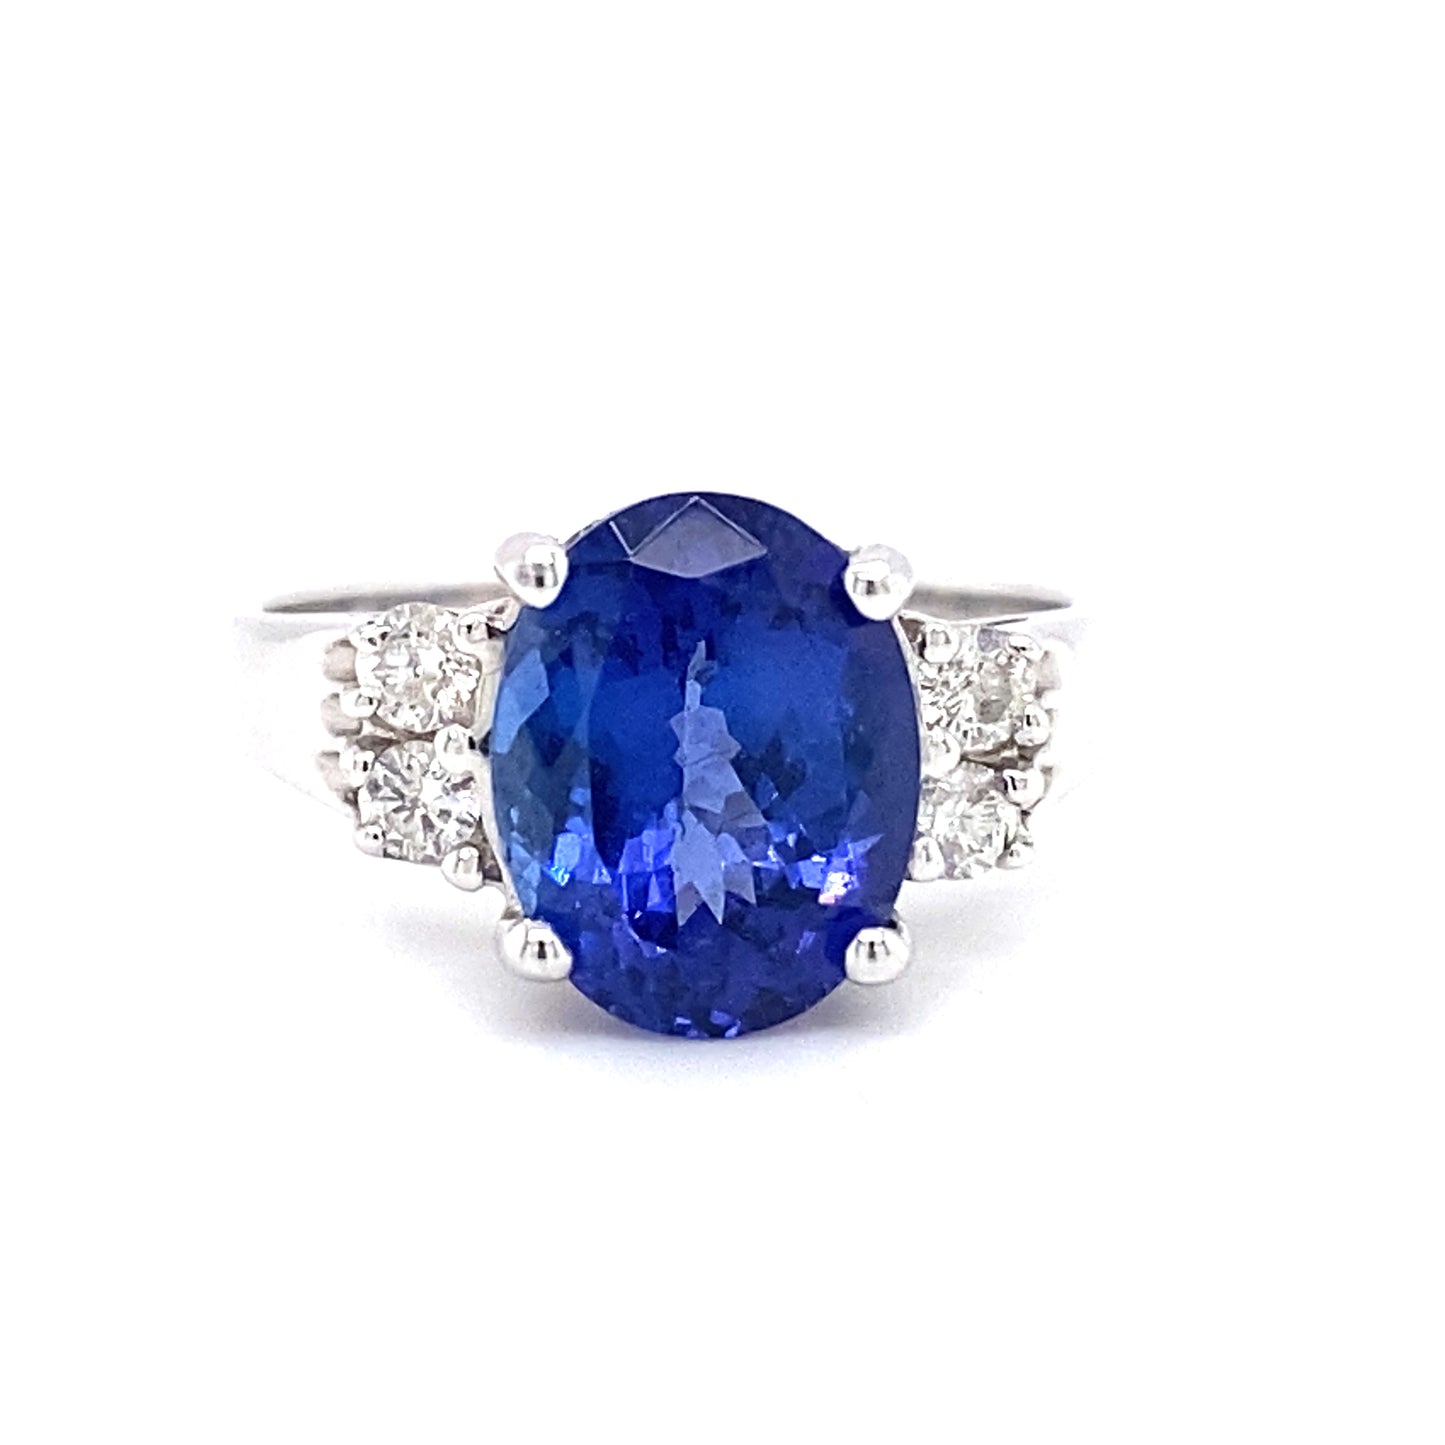 Le Vian 3.0ct Oval Tanzanite and Diamond Engagement Ring in 14K White Gold